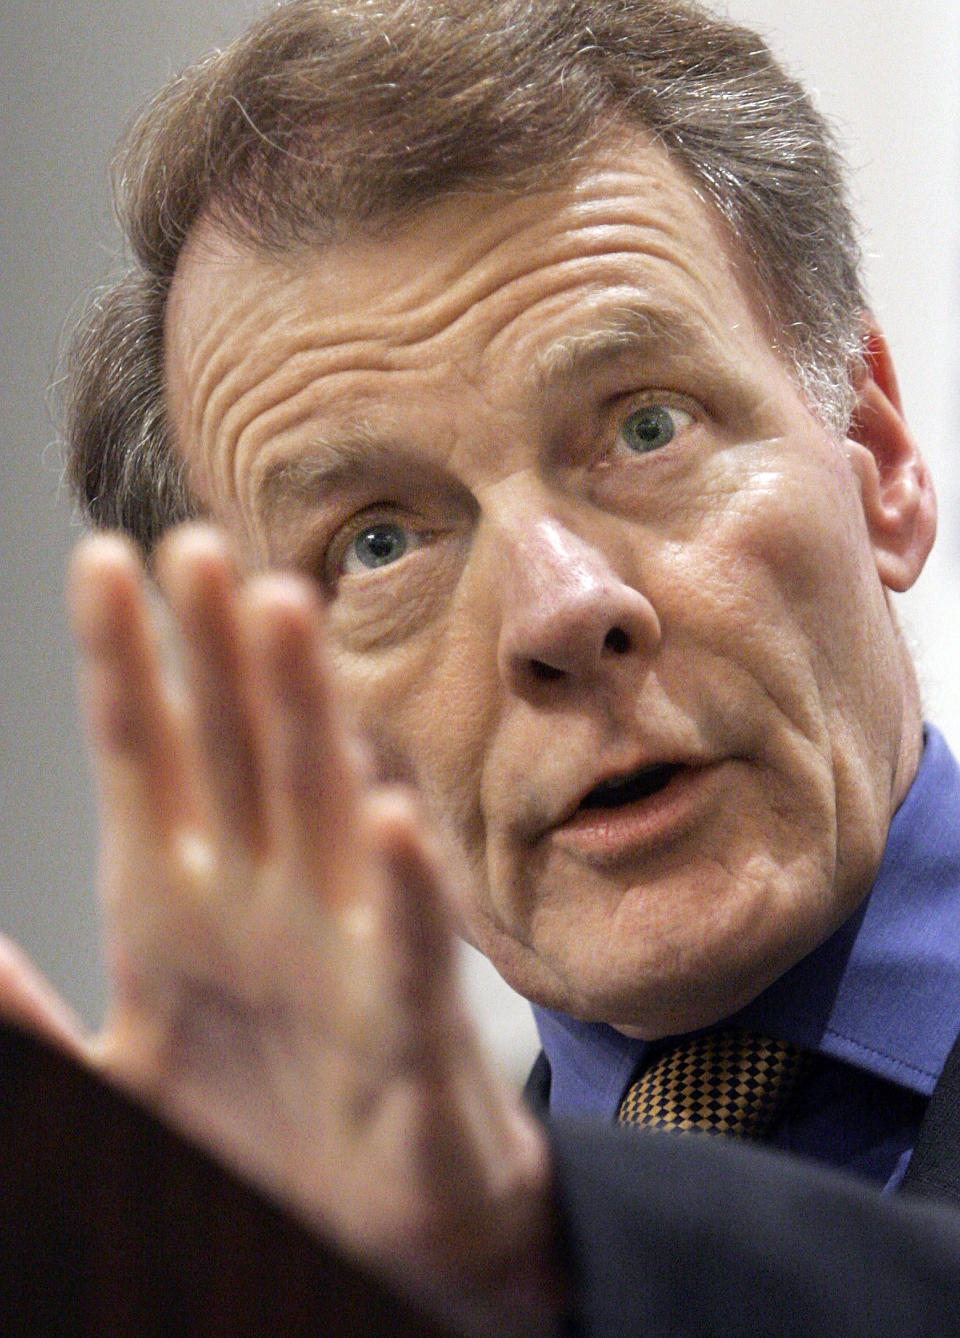 FILE - Then-Illinois Speaker of the House Michael Madigan, D-Chicago, speaks in Springfield, Ill., onMay 2, 2007. Madigan, the former speaker of the Illinois House and for decades one of the nation’s most powerful legislators, was charged with racketeering and bribery on Wednesday March 2, 2022, becoming the most prominent politician swept up in the latest federal investigation of entrenched government corruption in the state. (AP Photo/Seth Perlman File)